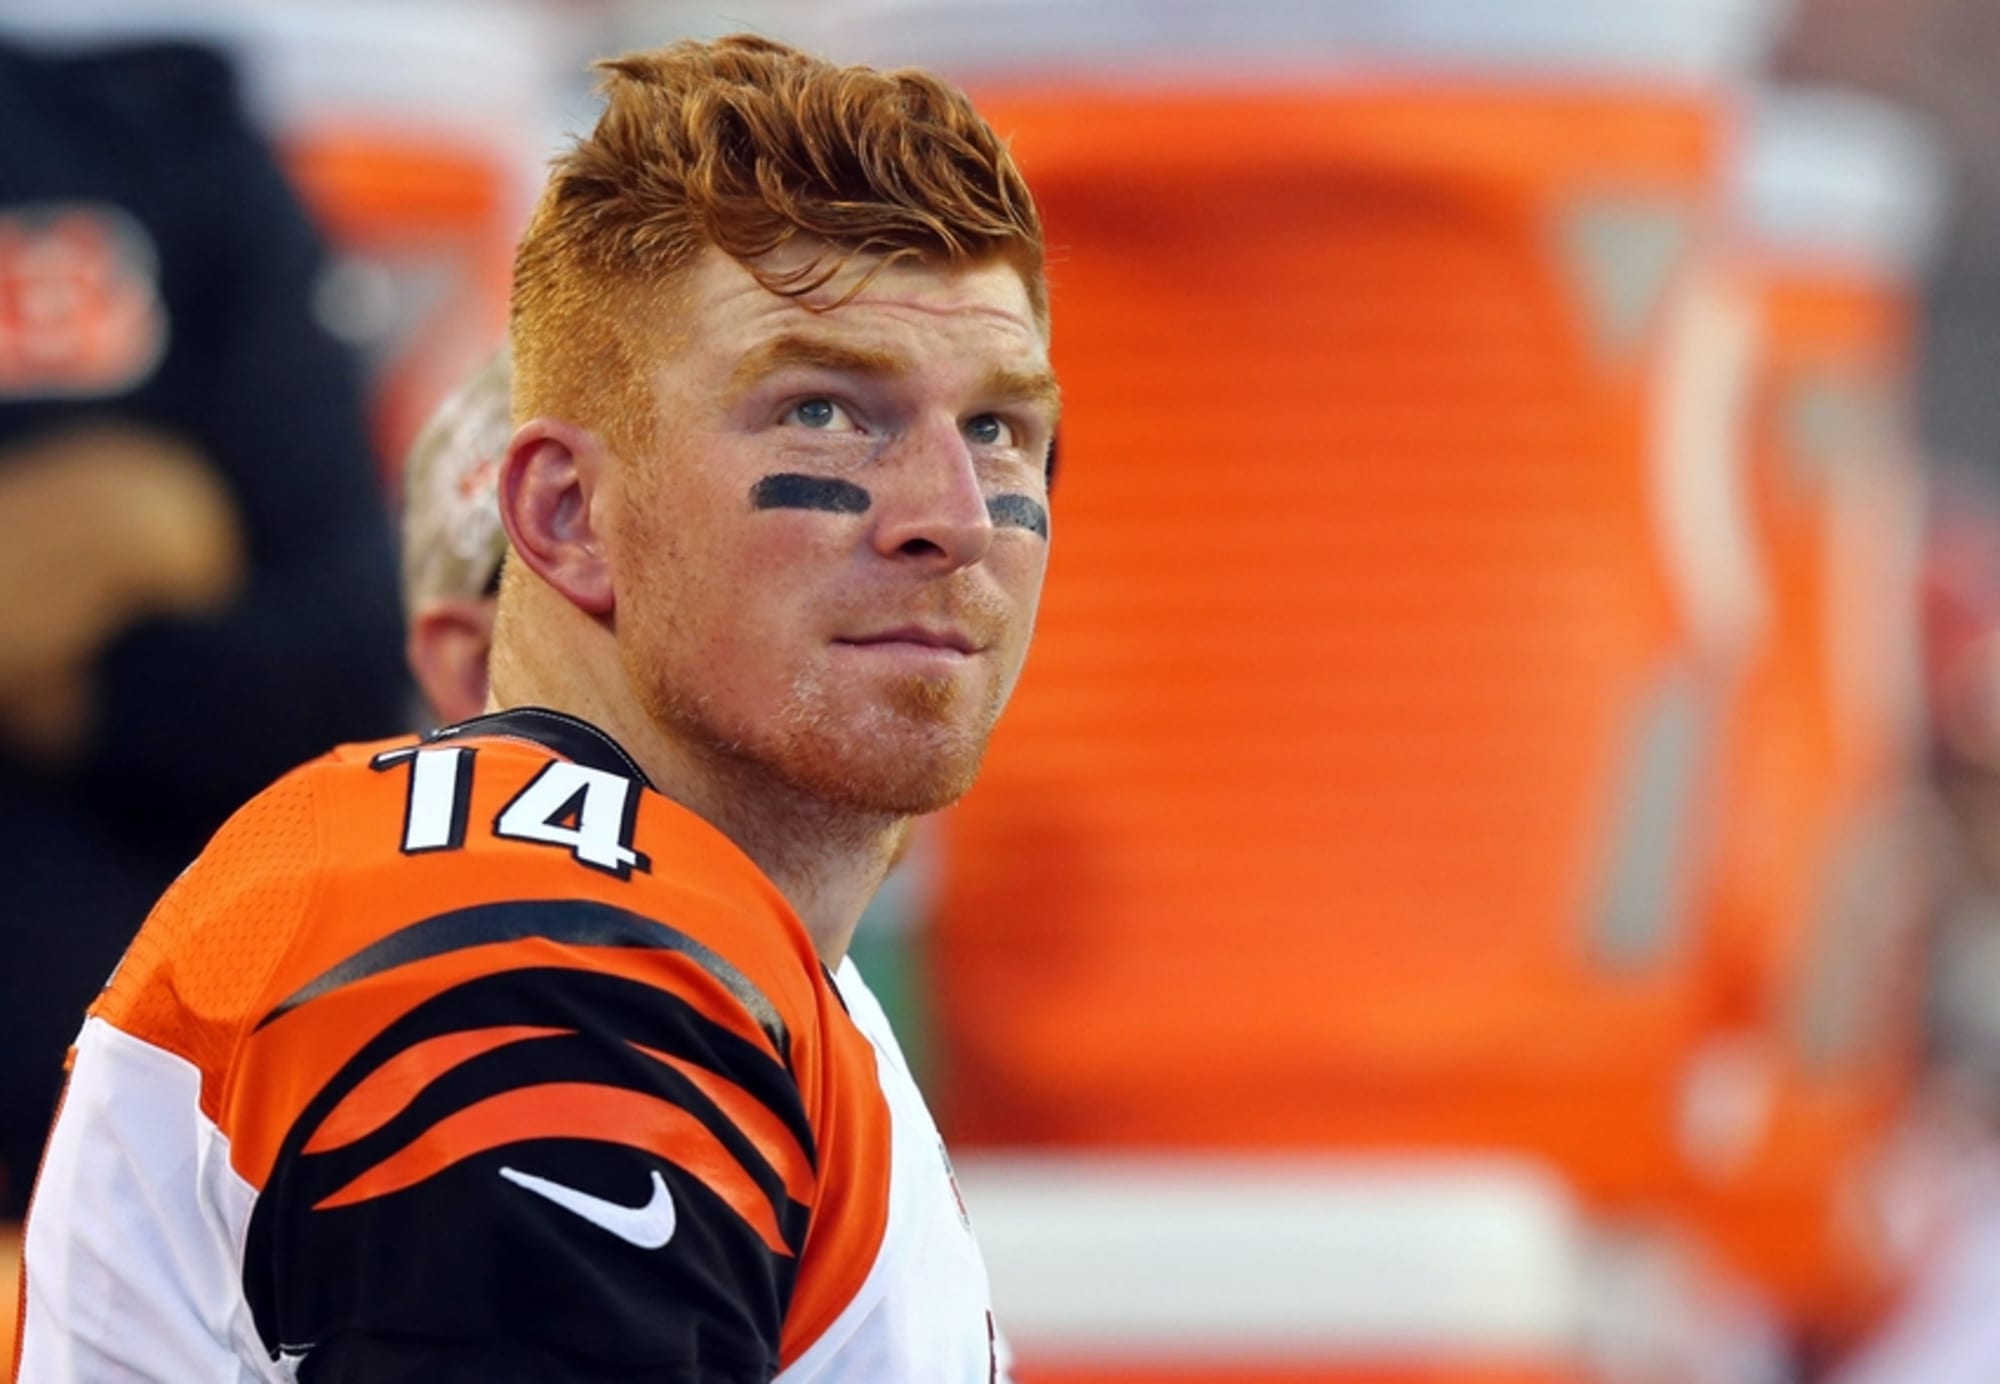 Bengals' Andy Dalton Replaces Tom Brady In 2017 Pro Bowl